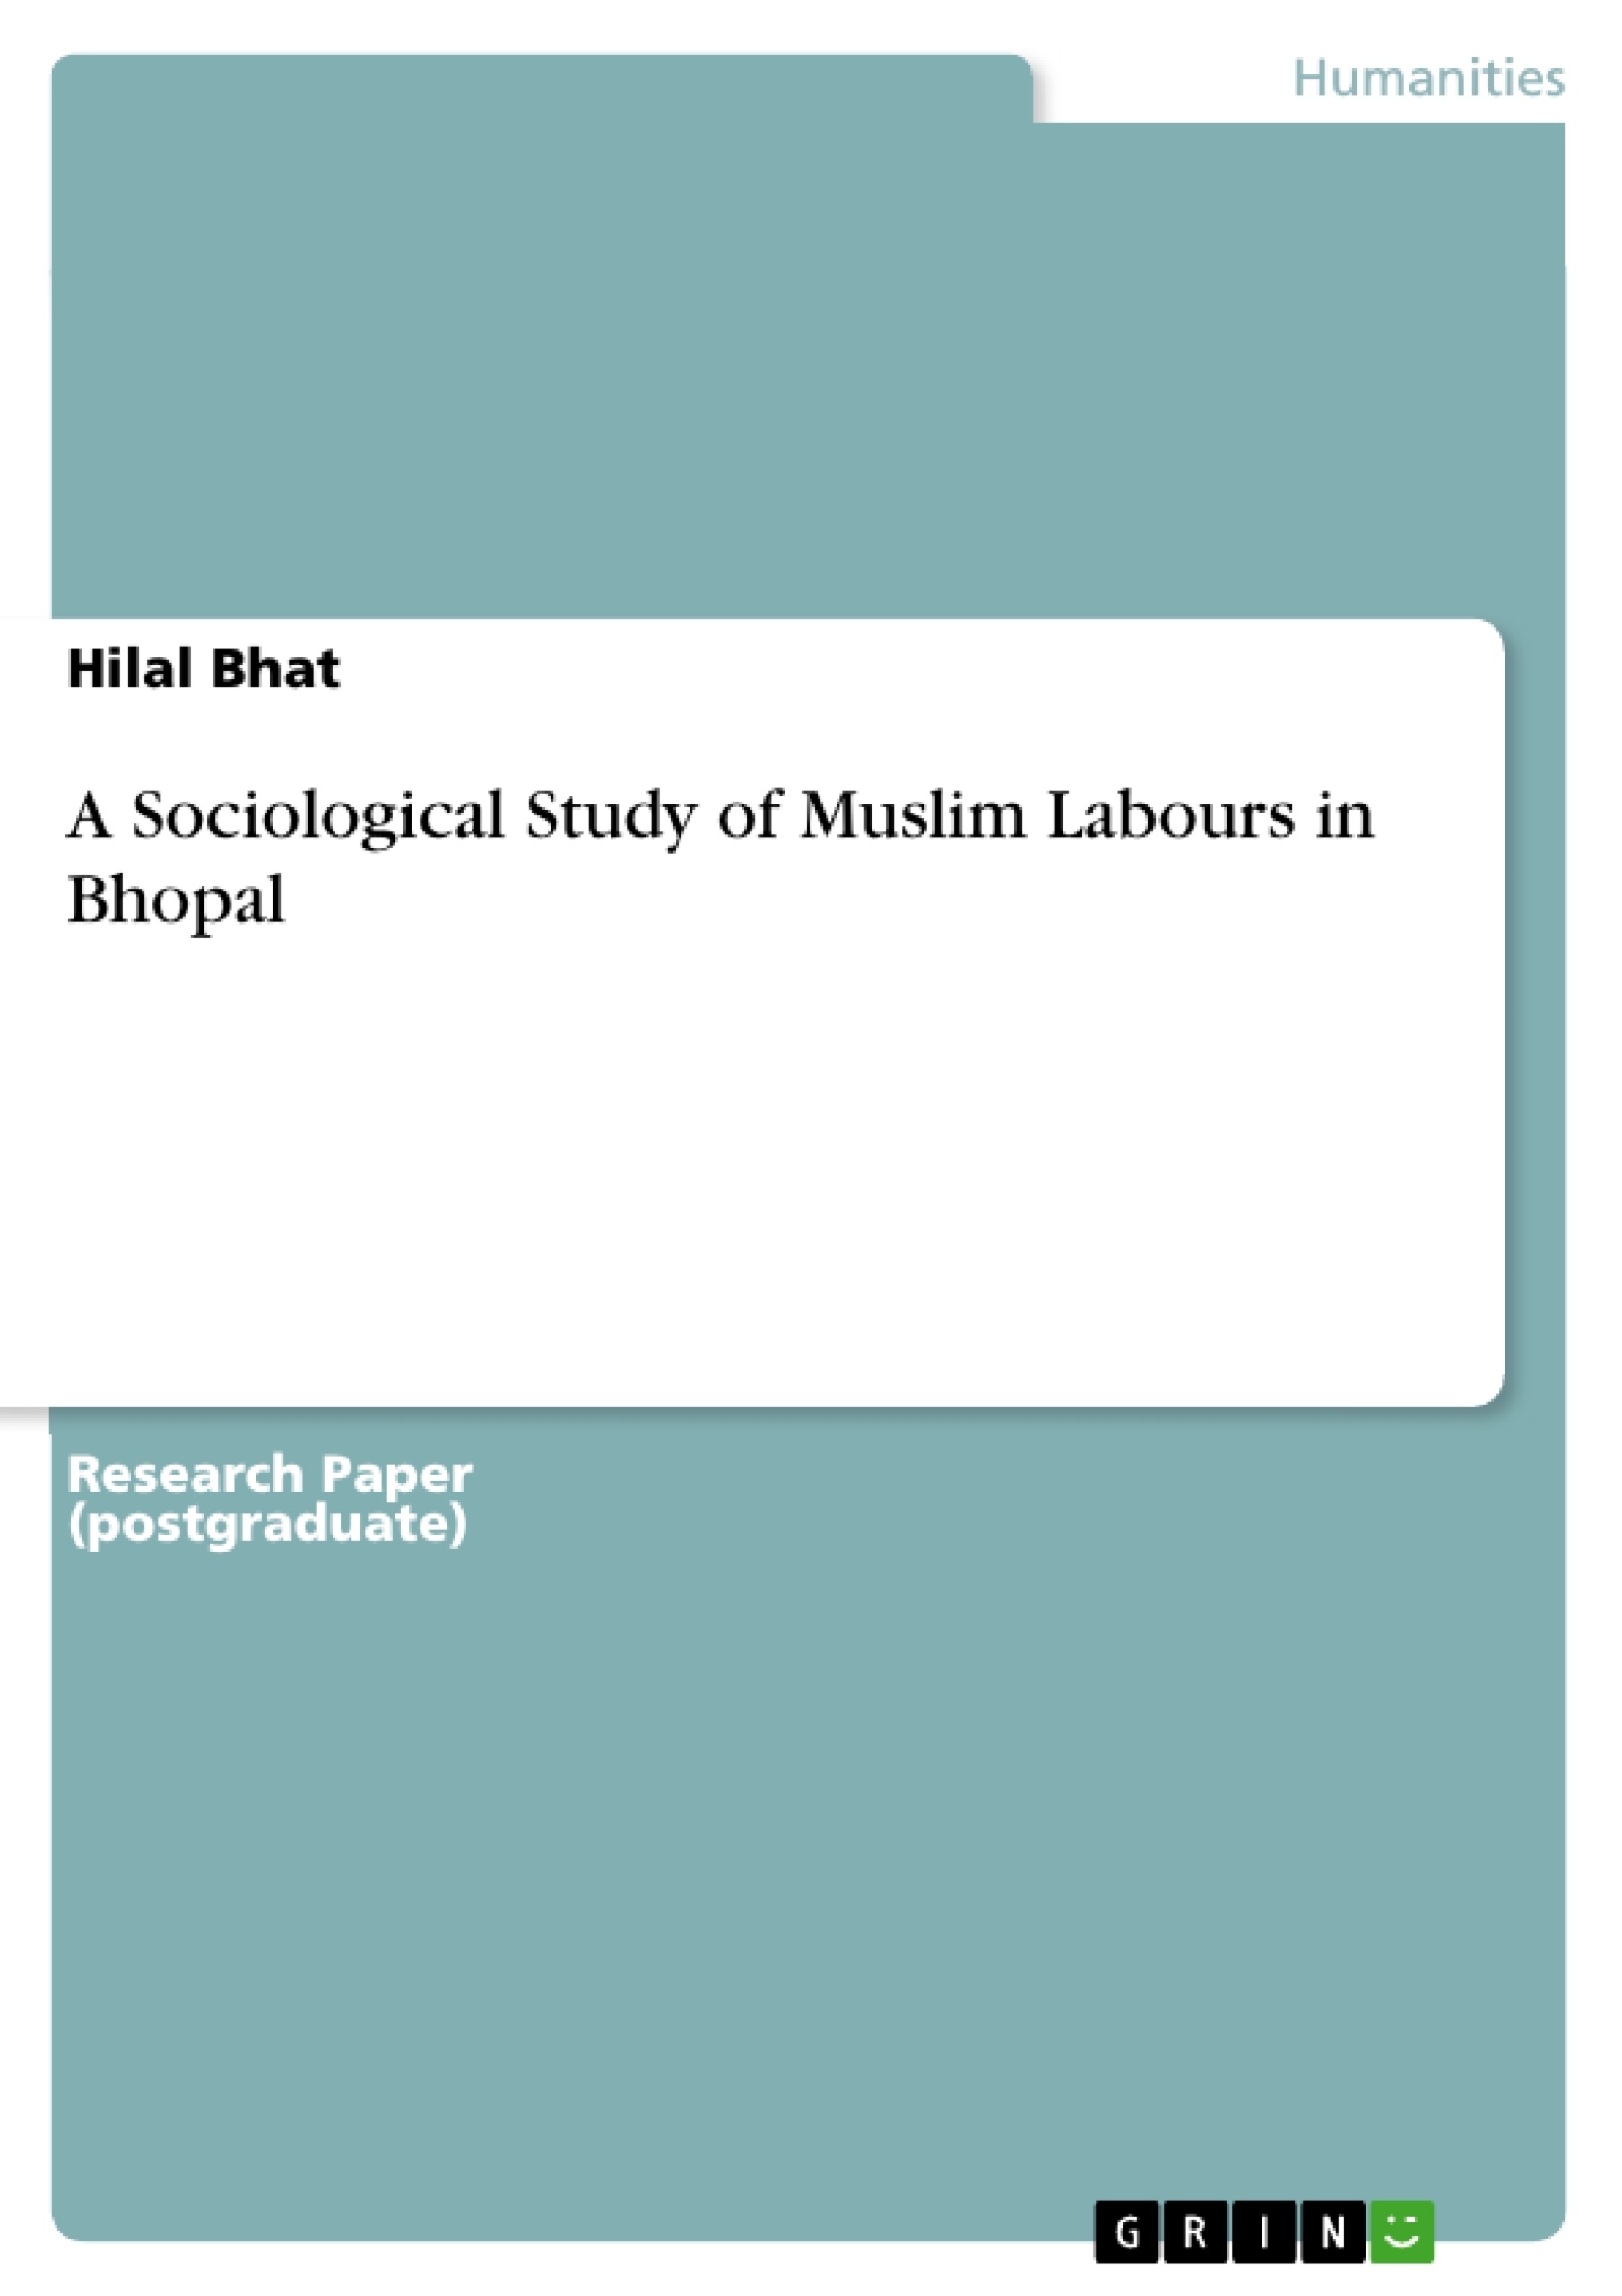 Título: A Sociological Study of Muslim Labours in Bhopal